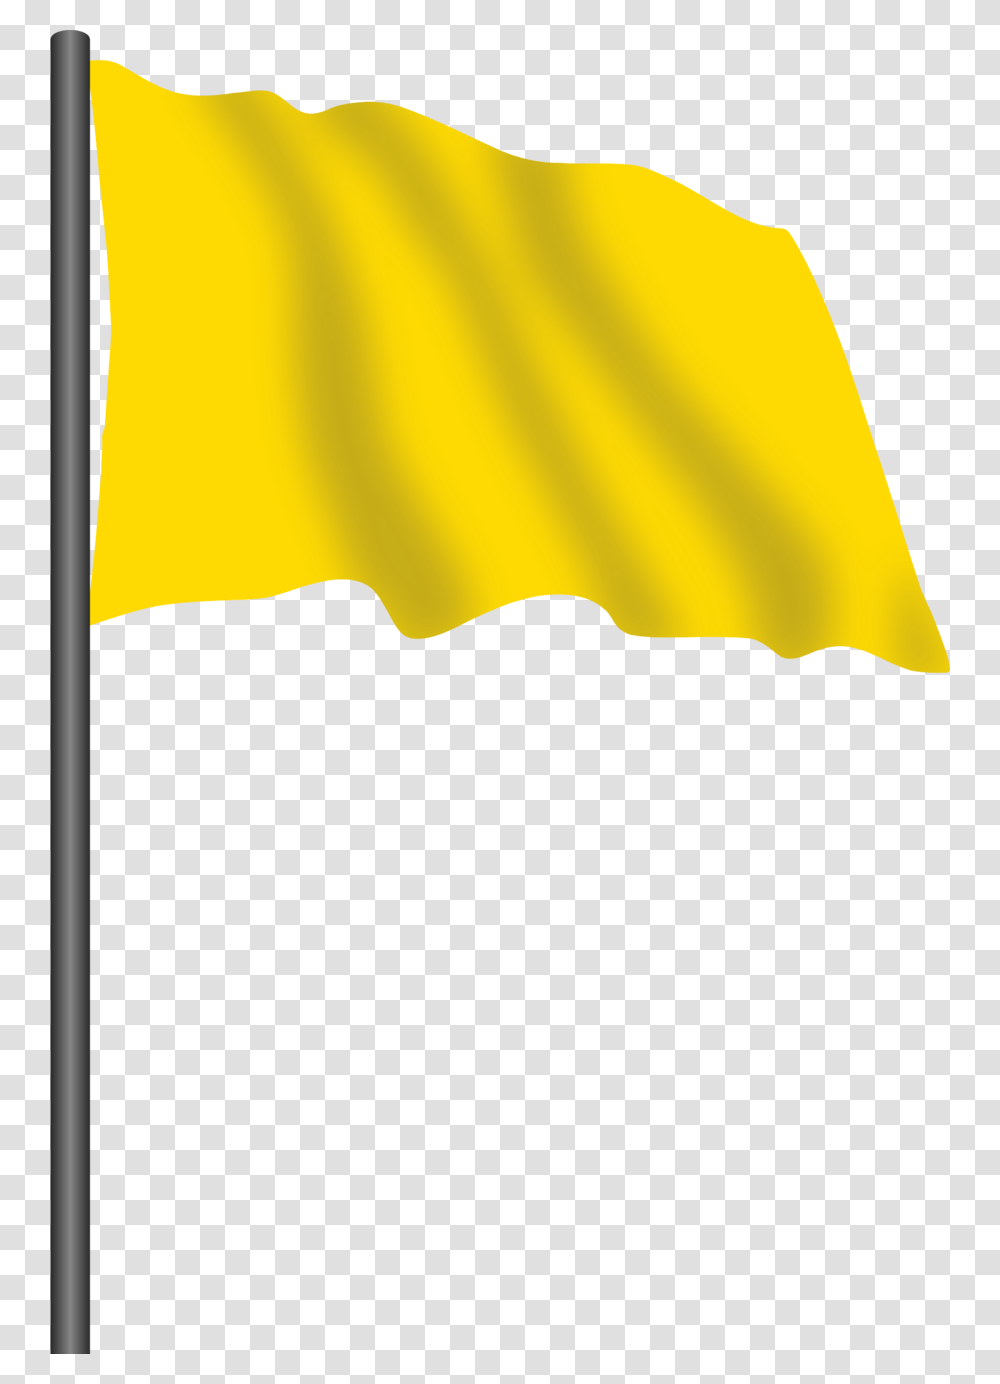 Flags Clipart Yellow Yellow Colour Flag, Apparel, Canopy, Bull Transparent Png